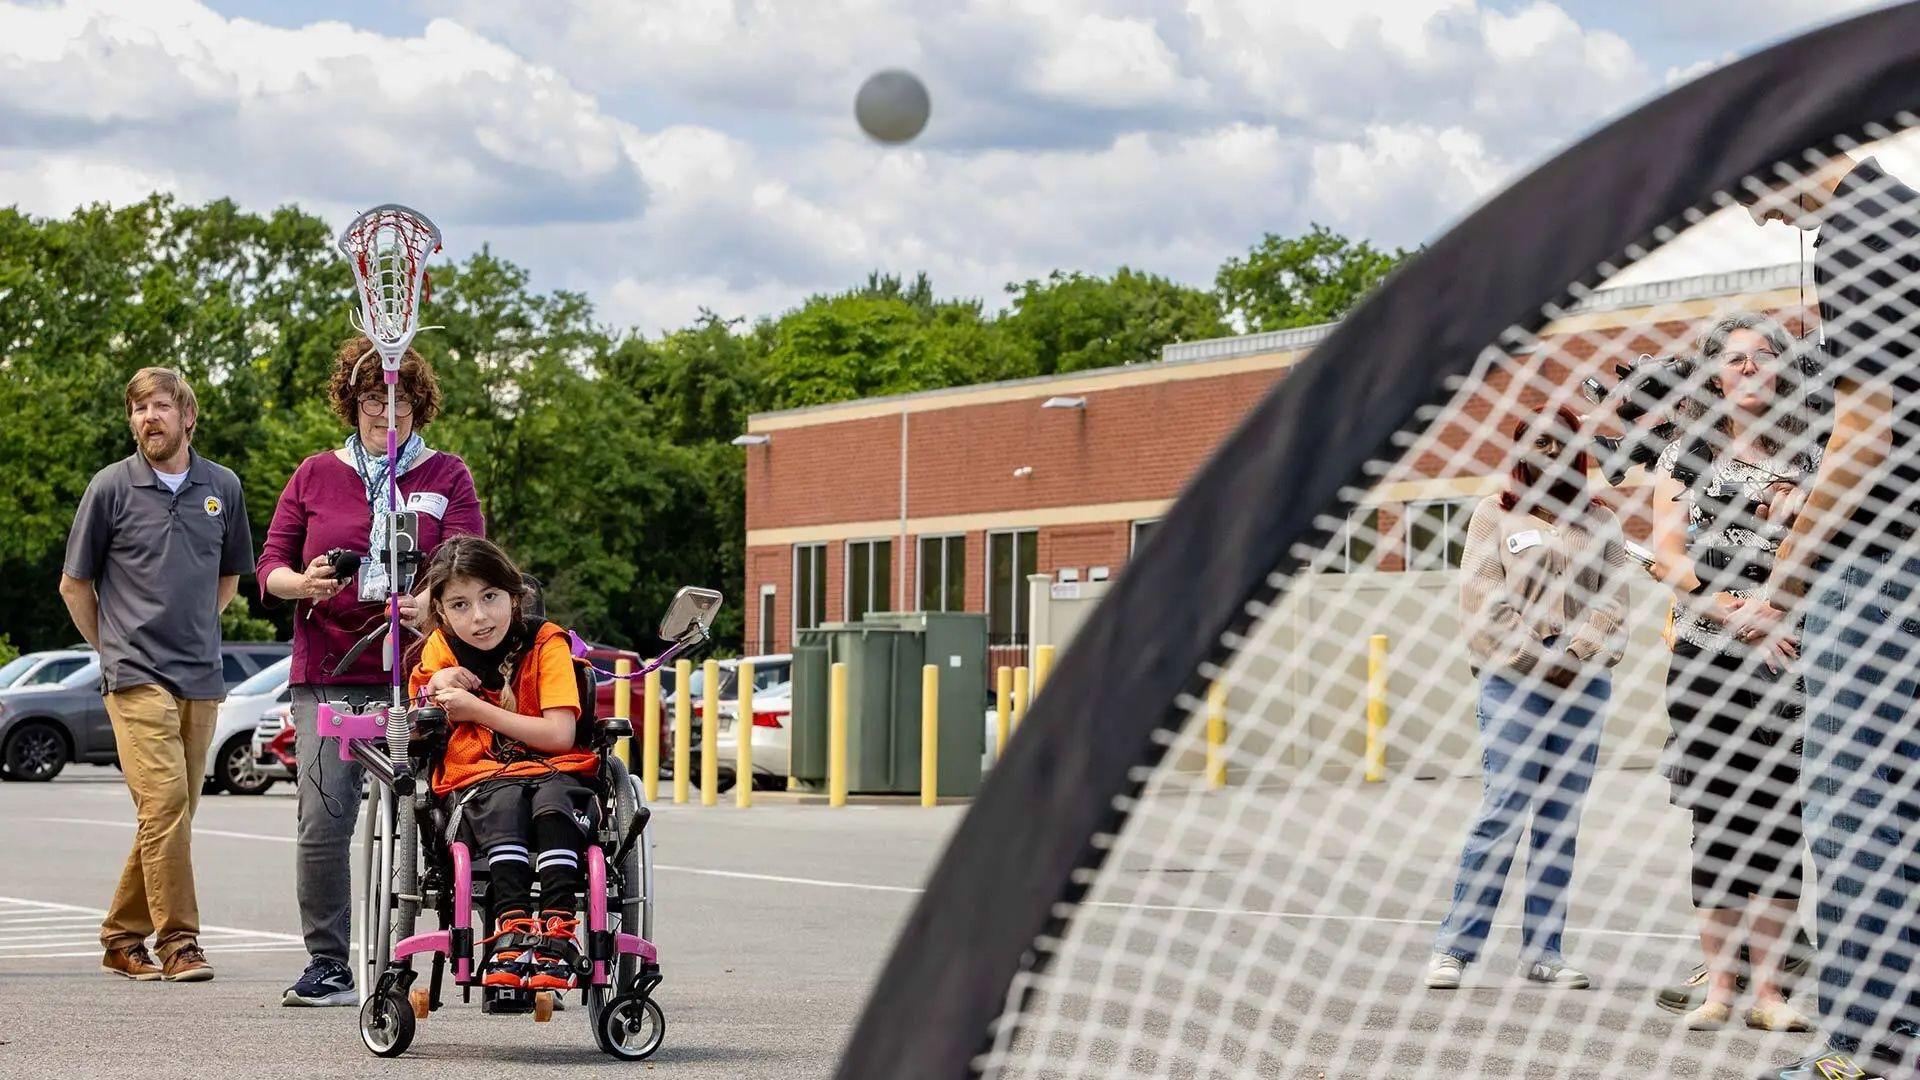 Stella Stakolosa scores with an adaptive lacrosse stick engineered by College Park Academy students under the guidance of teacher Brendan McCarthy (left), as part of the Engineering for Us All program.  Photo by John T. Consoli